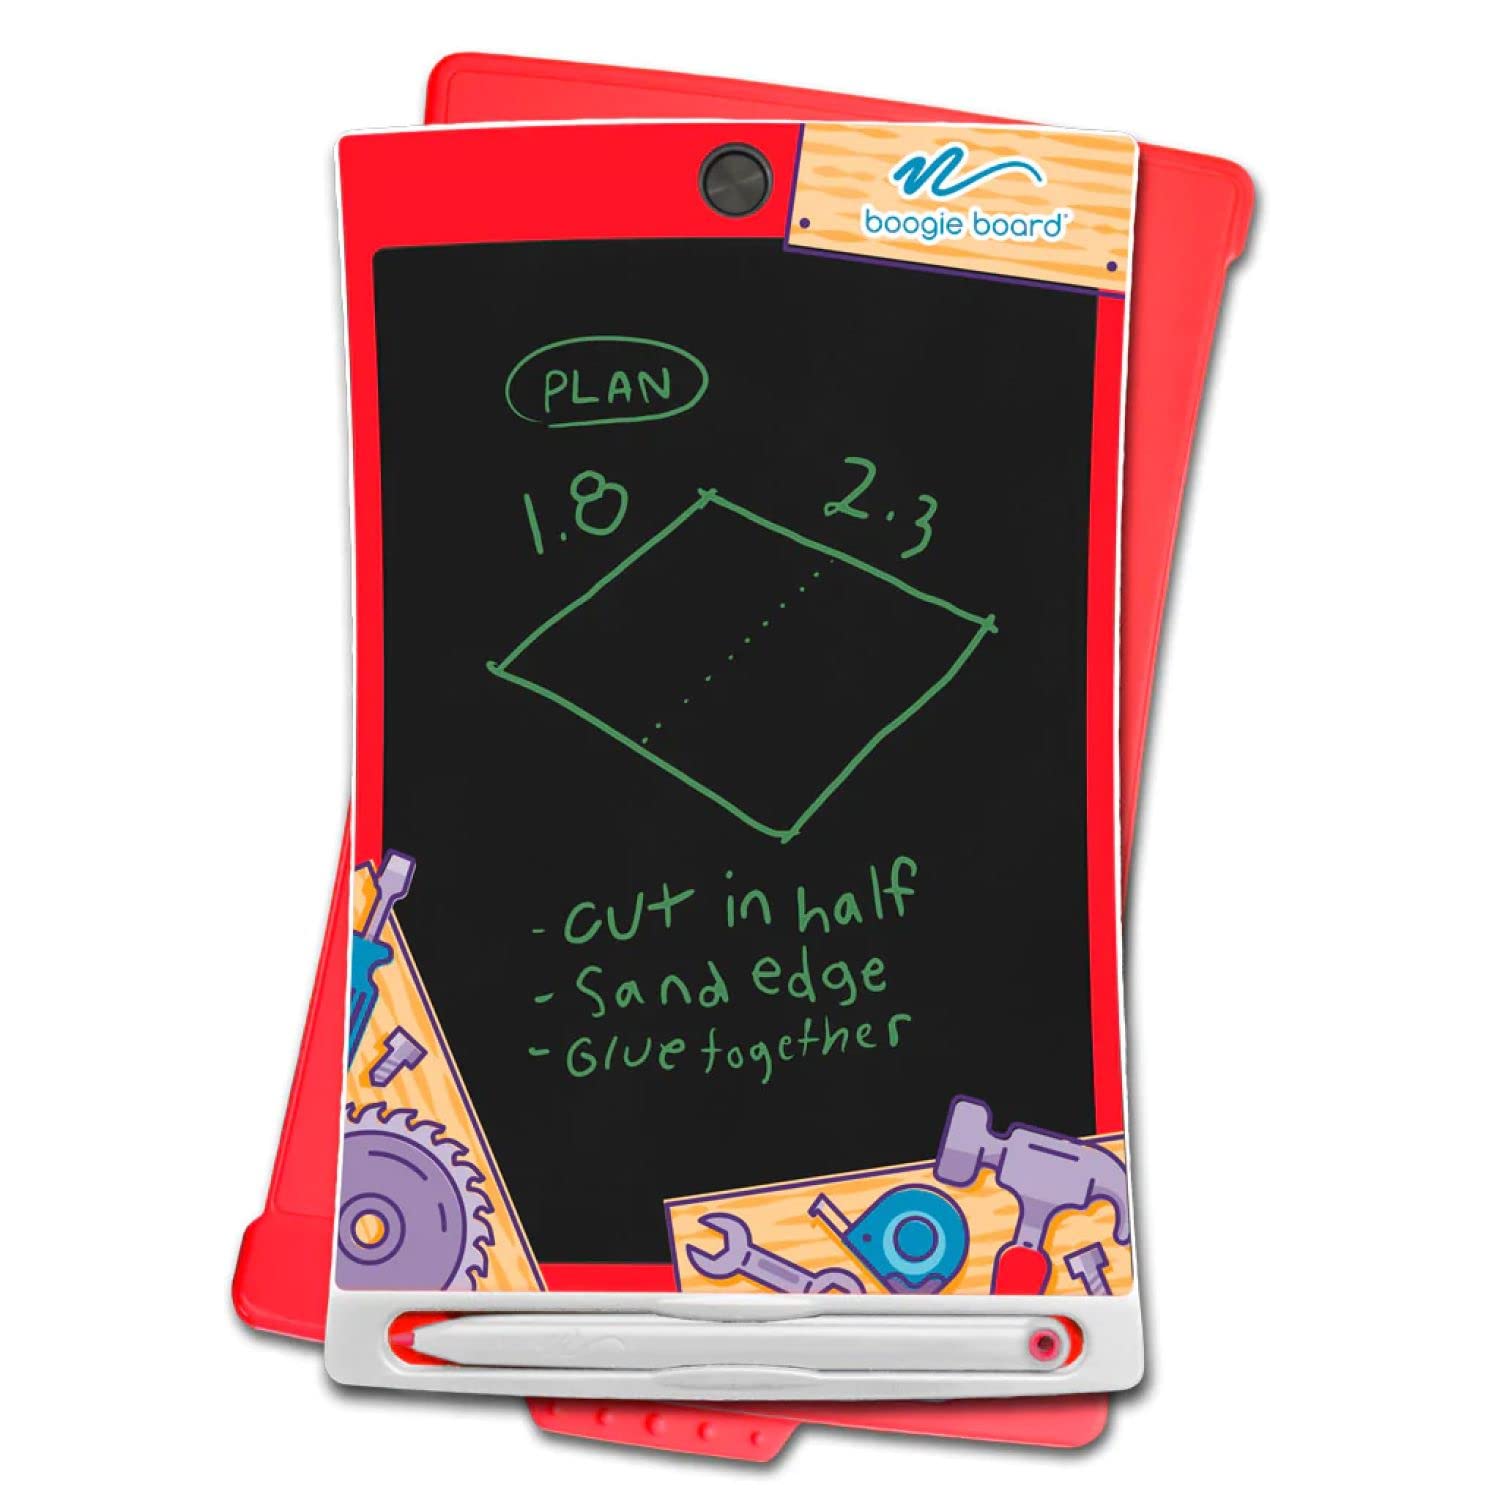 Boogie Board Jot Kids Lil Helpers Reusable Writing Tablet with 8.5 in Kids Drawing Board, Stylus, Built-in Kickstand, Hard Protective Cover, Ages 4+ (Builder)